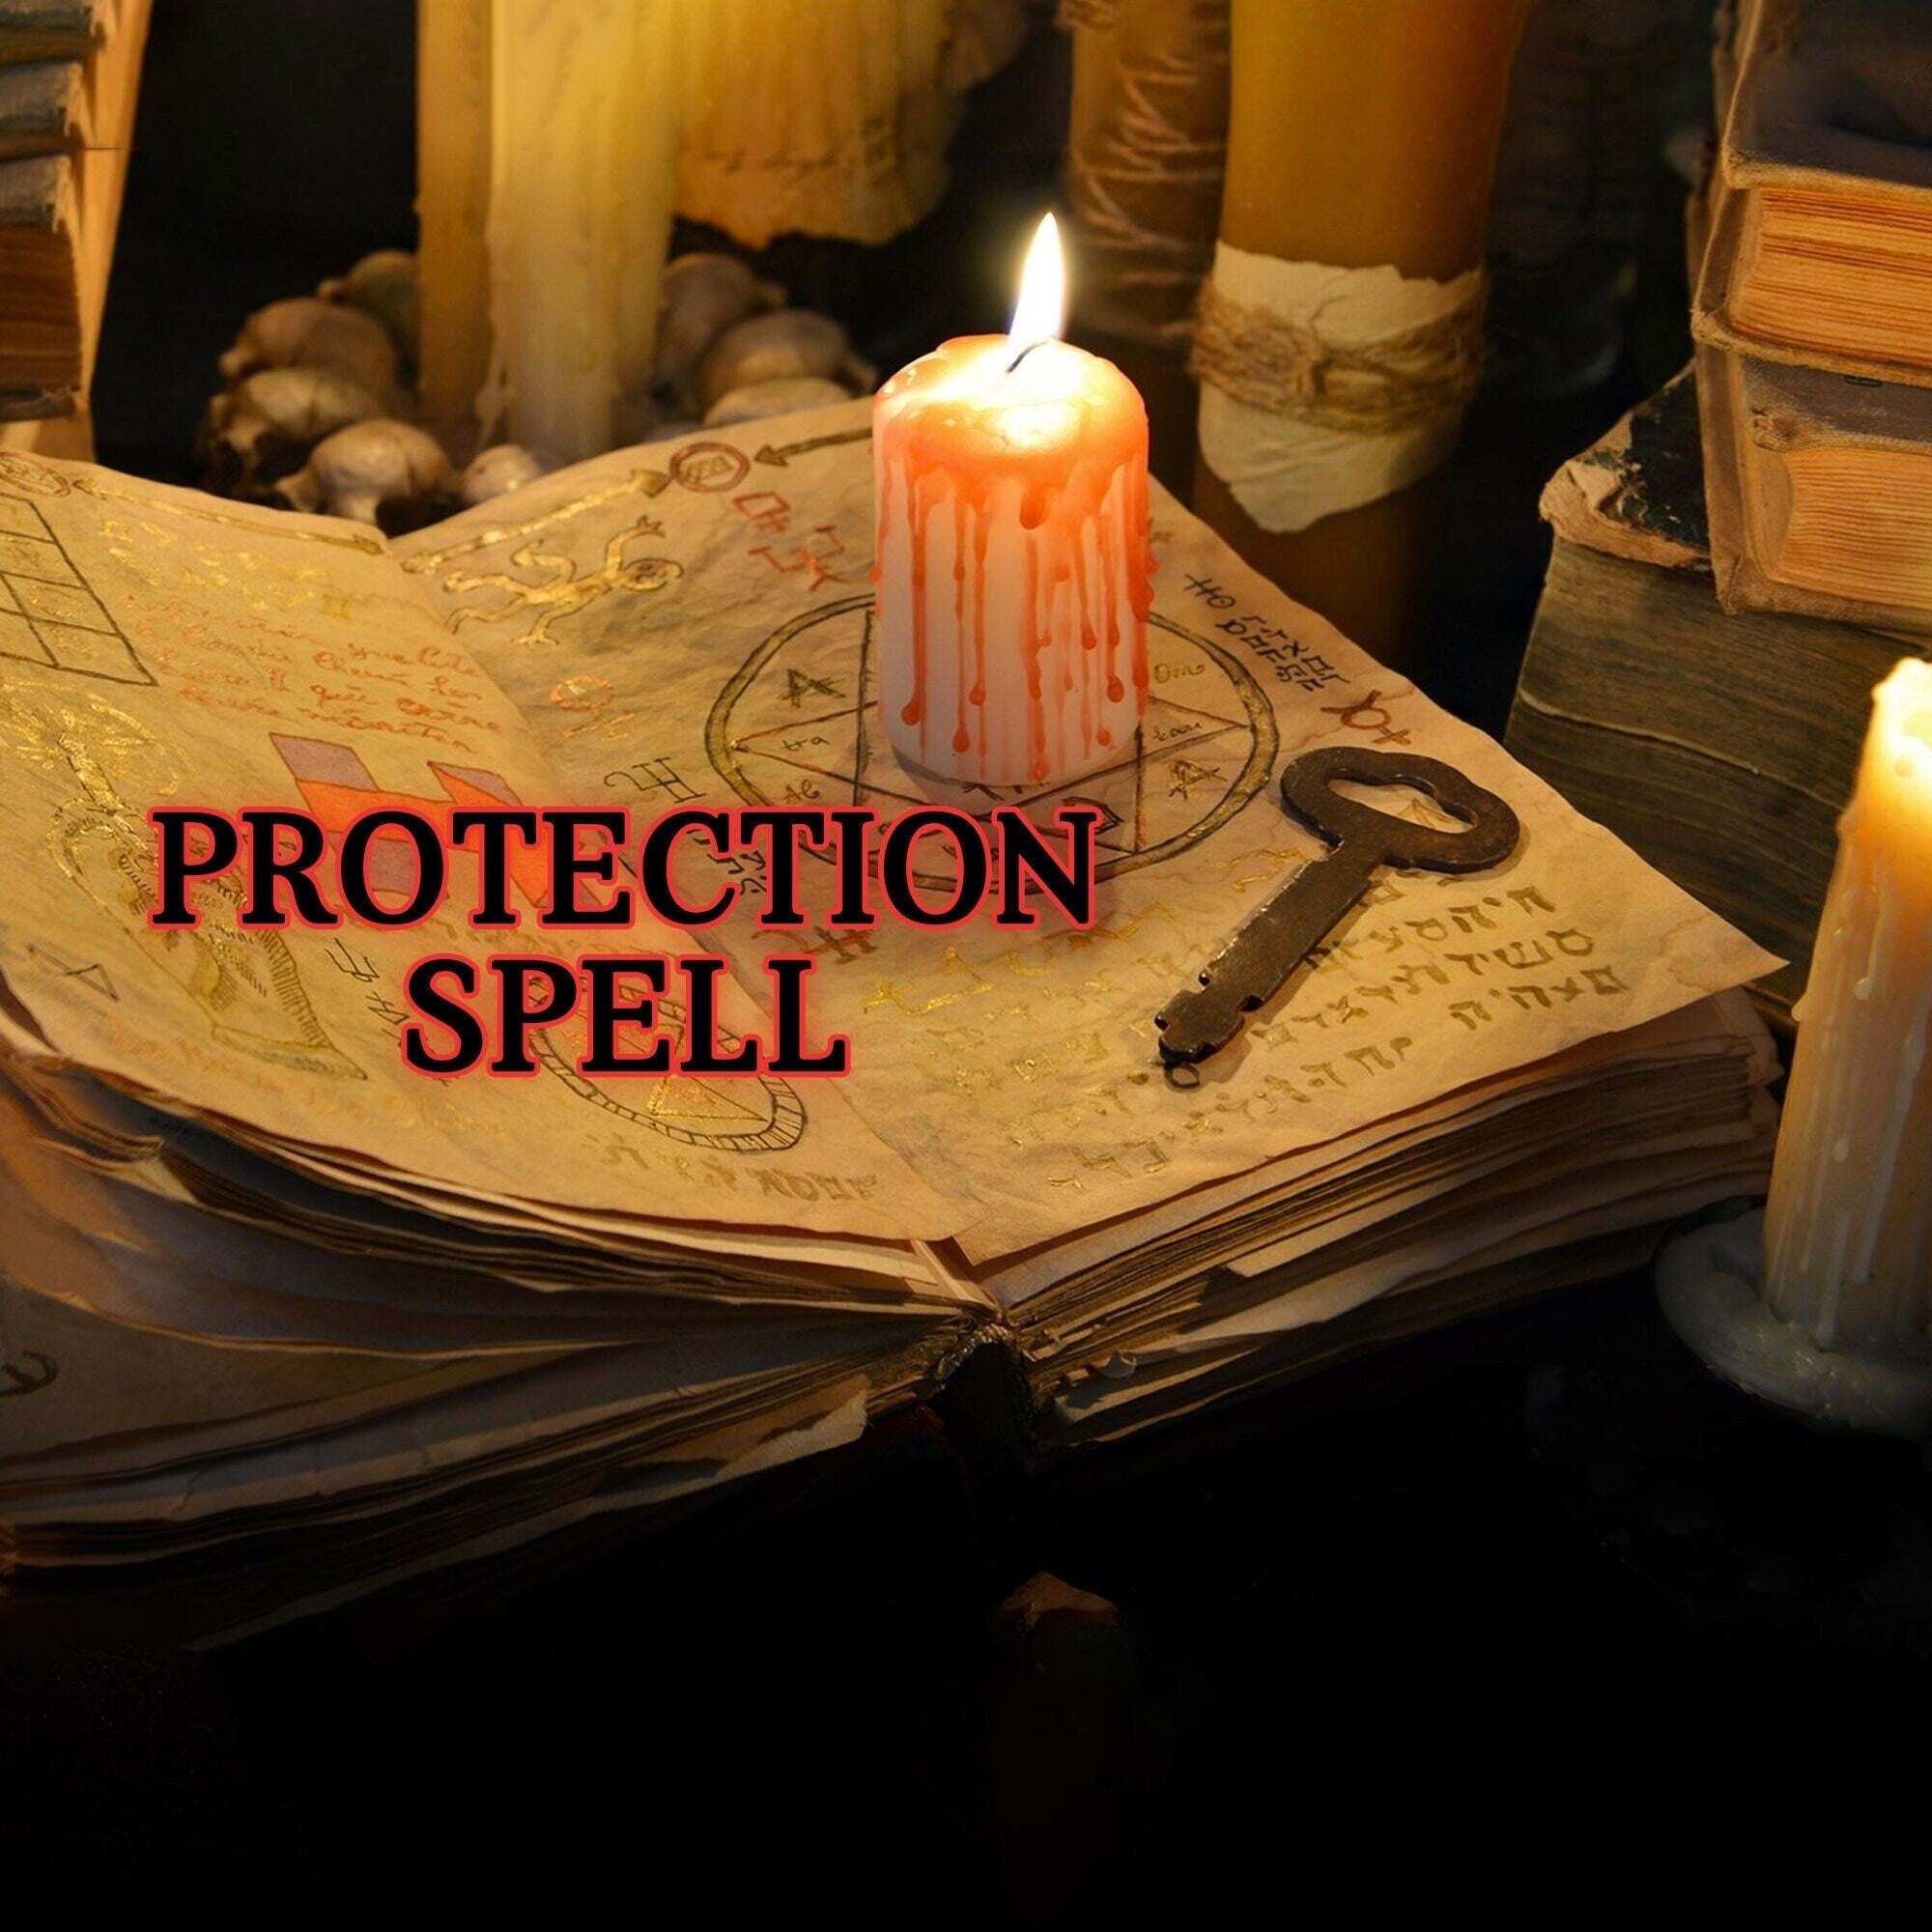 PROTECTION SPELL Powerful Hoodoo Angelic Energy Protect From Curses Hexes Negativity Witchcraft Voodoo Black Magic - MysticBluuMoonTarot